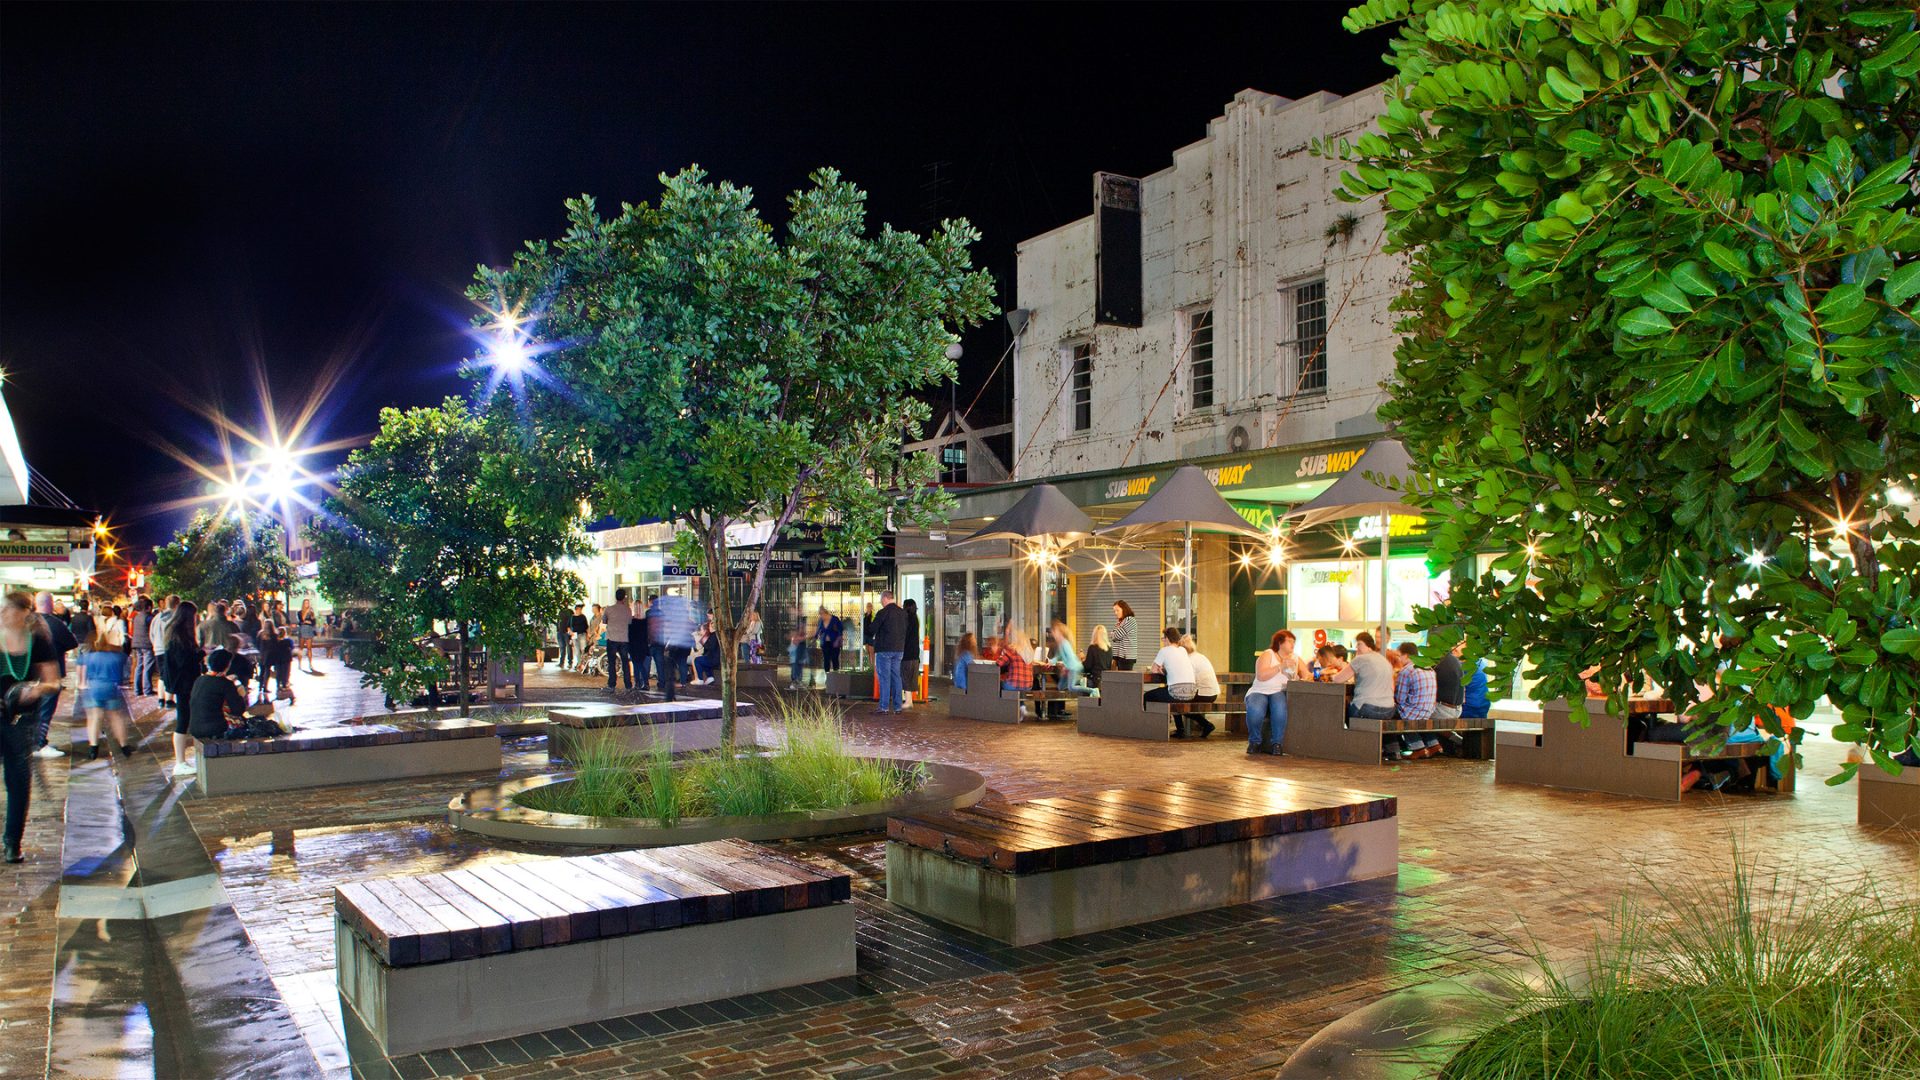 A bustling outdoor plaza at night, with people dining at brightly lit restaurants and walking along the pathway. Benches and trees are scattered around the area, with lights twinkling from the restaurant on the right side. The lively scene could easily be from a charming spot in Maitland.